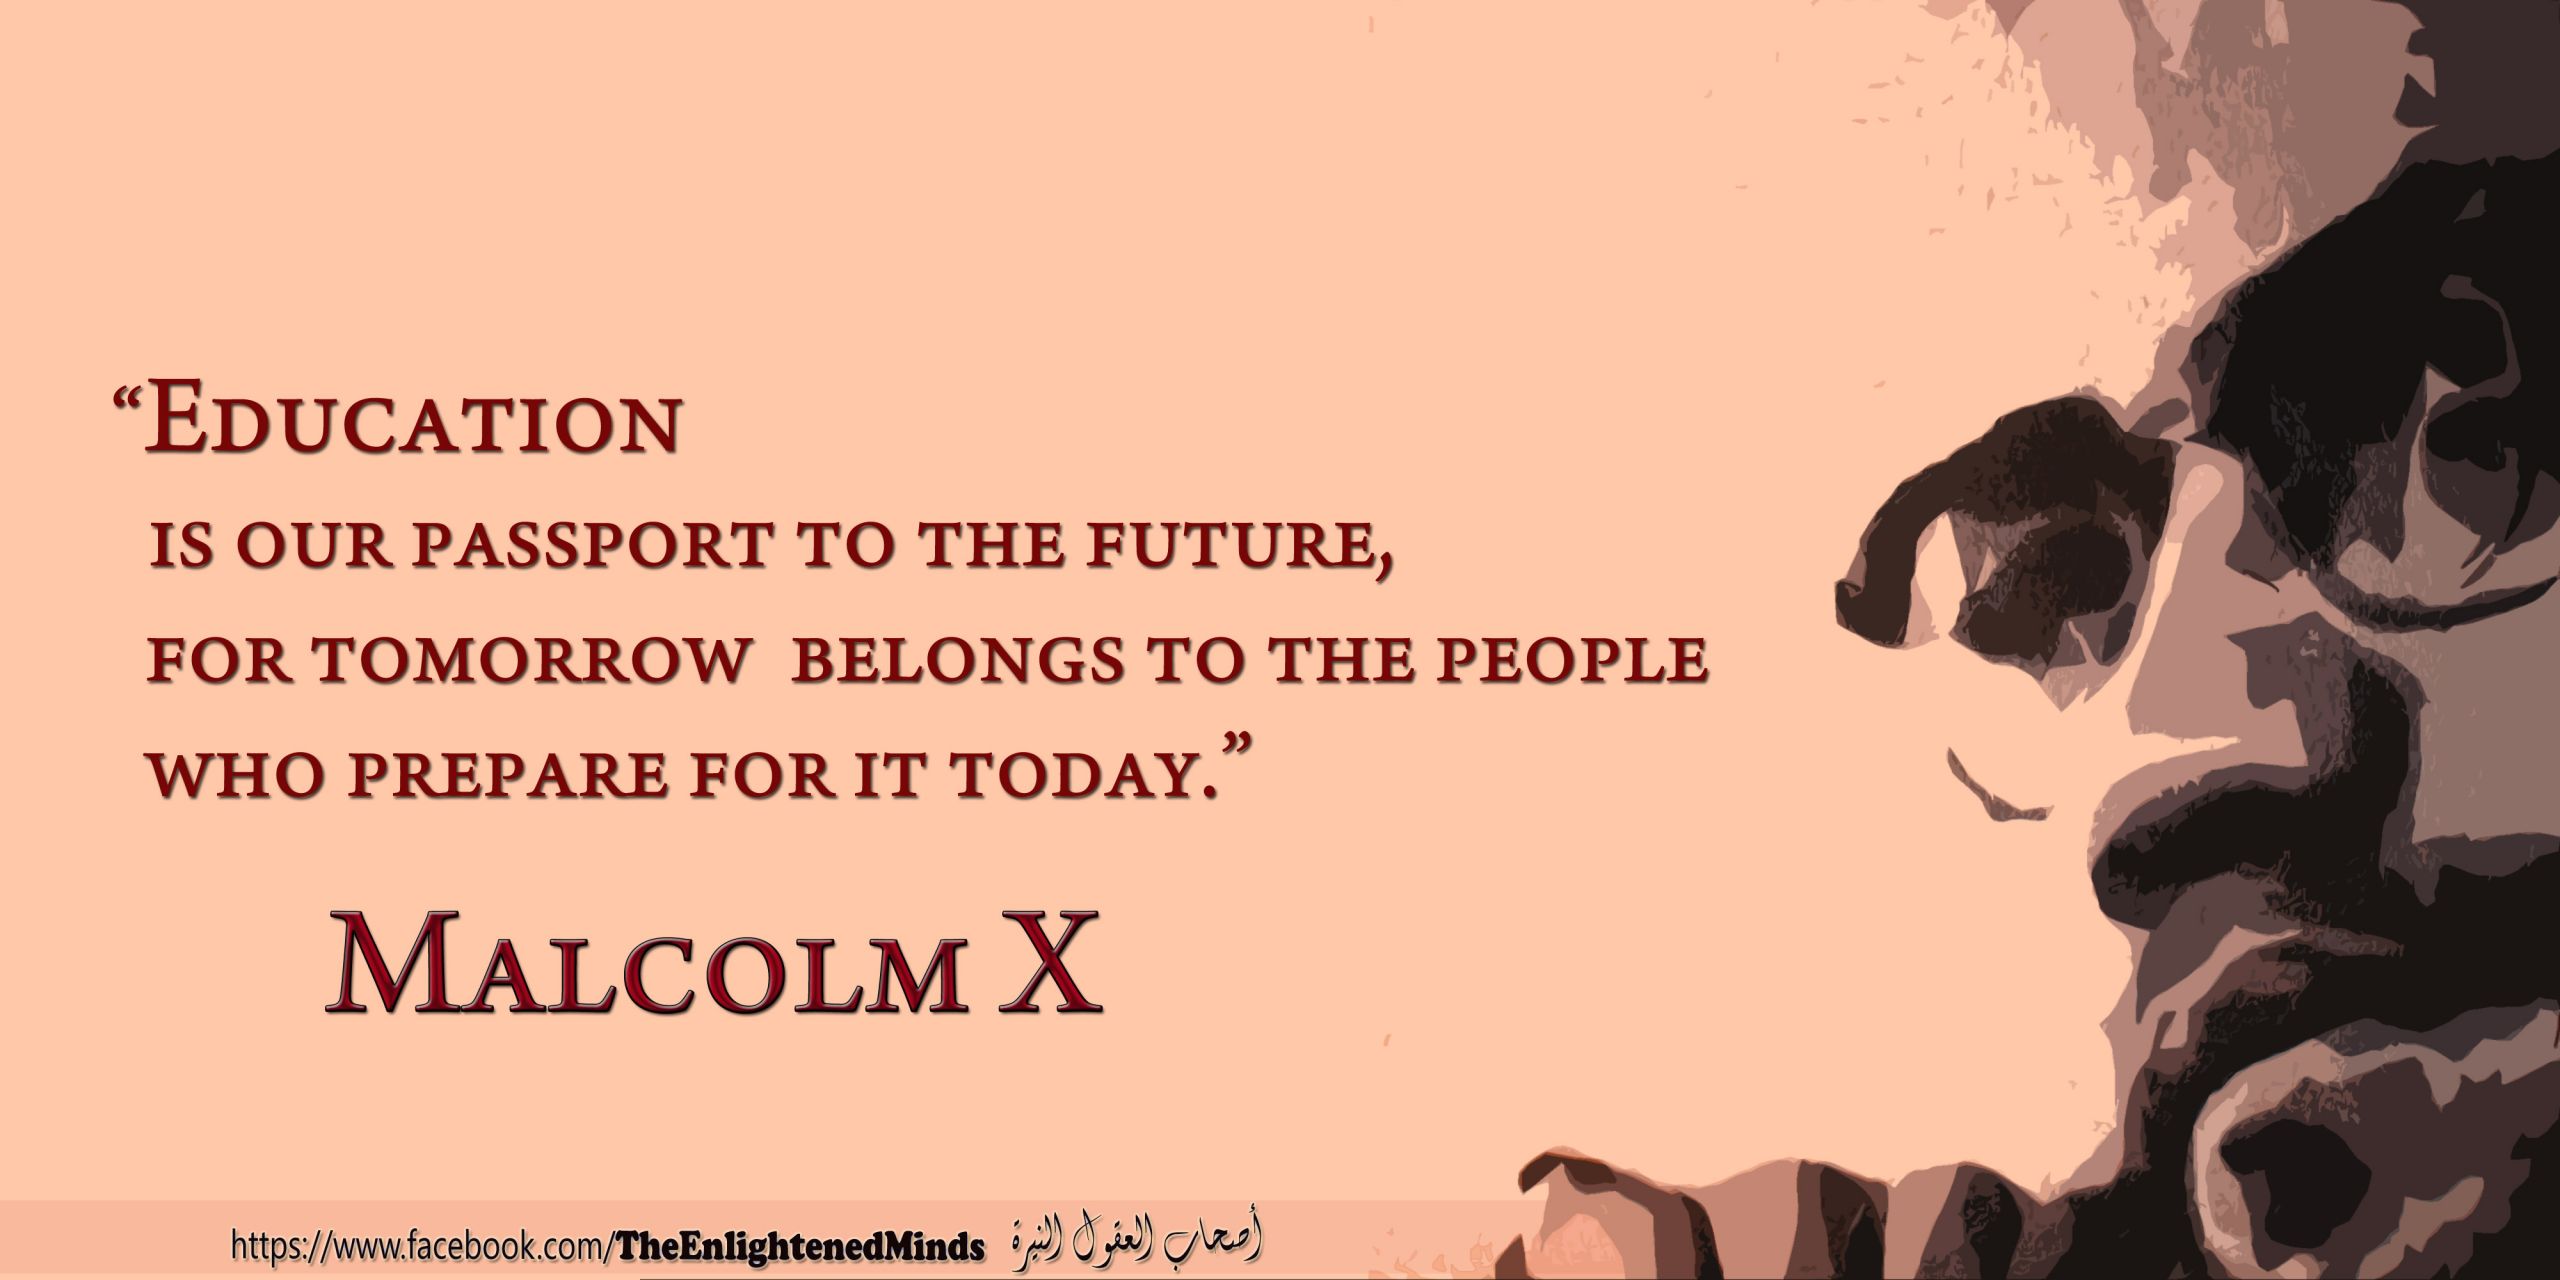 Malcolm X Quotes Education
 Inspirational Quote by Stefan Allen